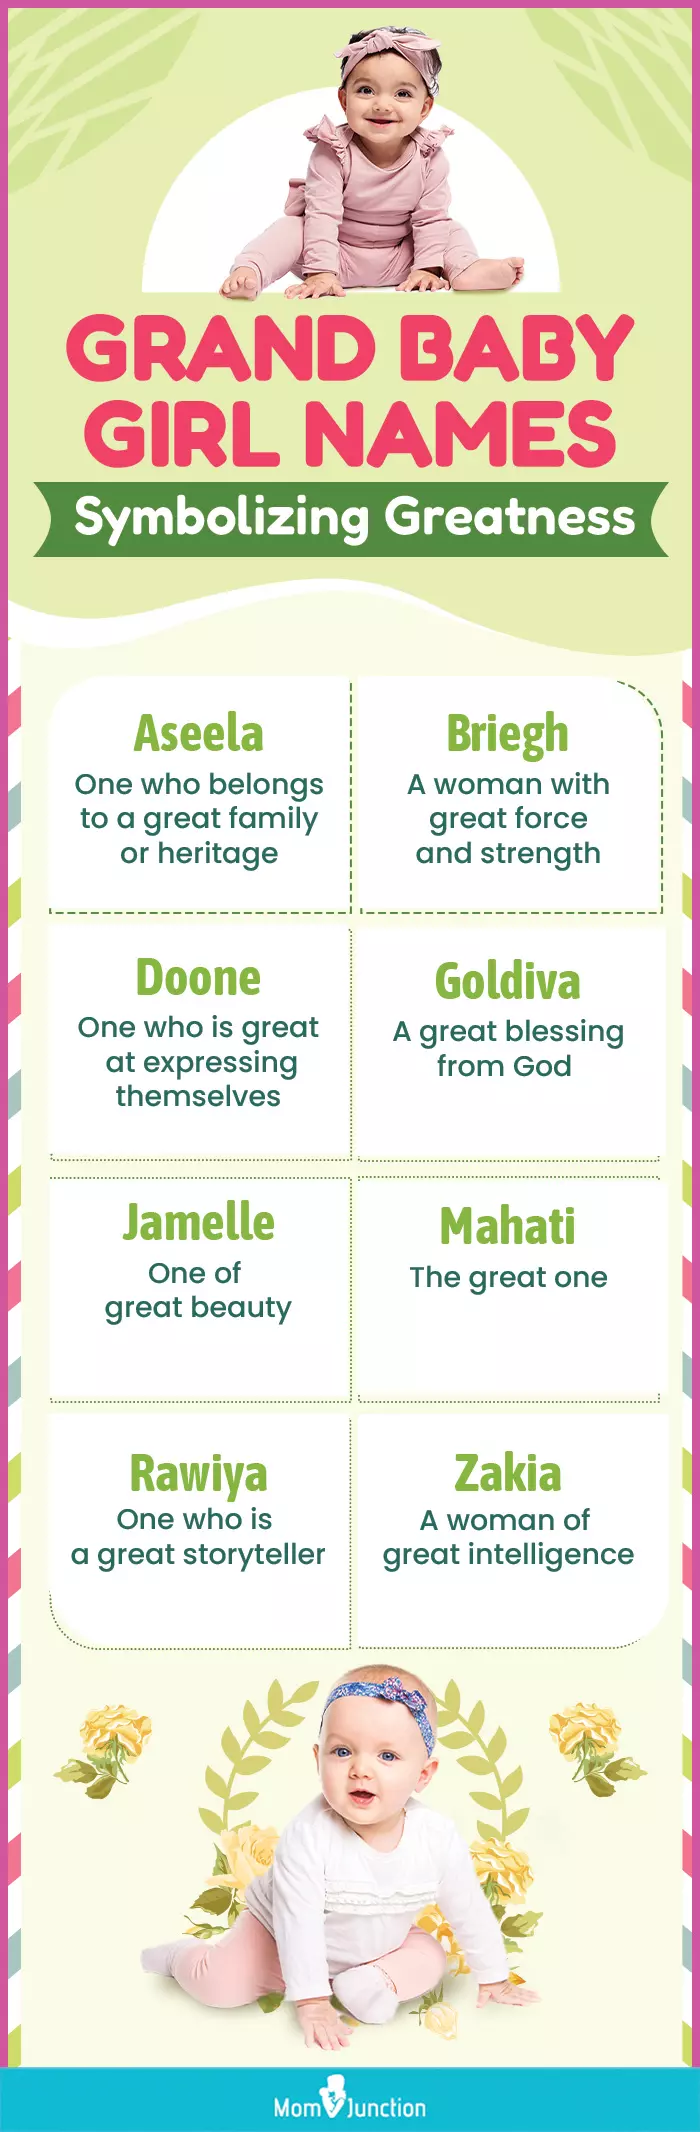 grand baby girl names symbolizing greatness (infographic)